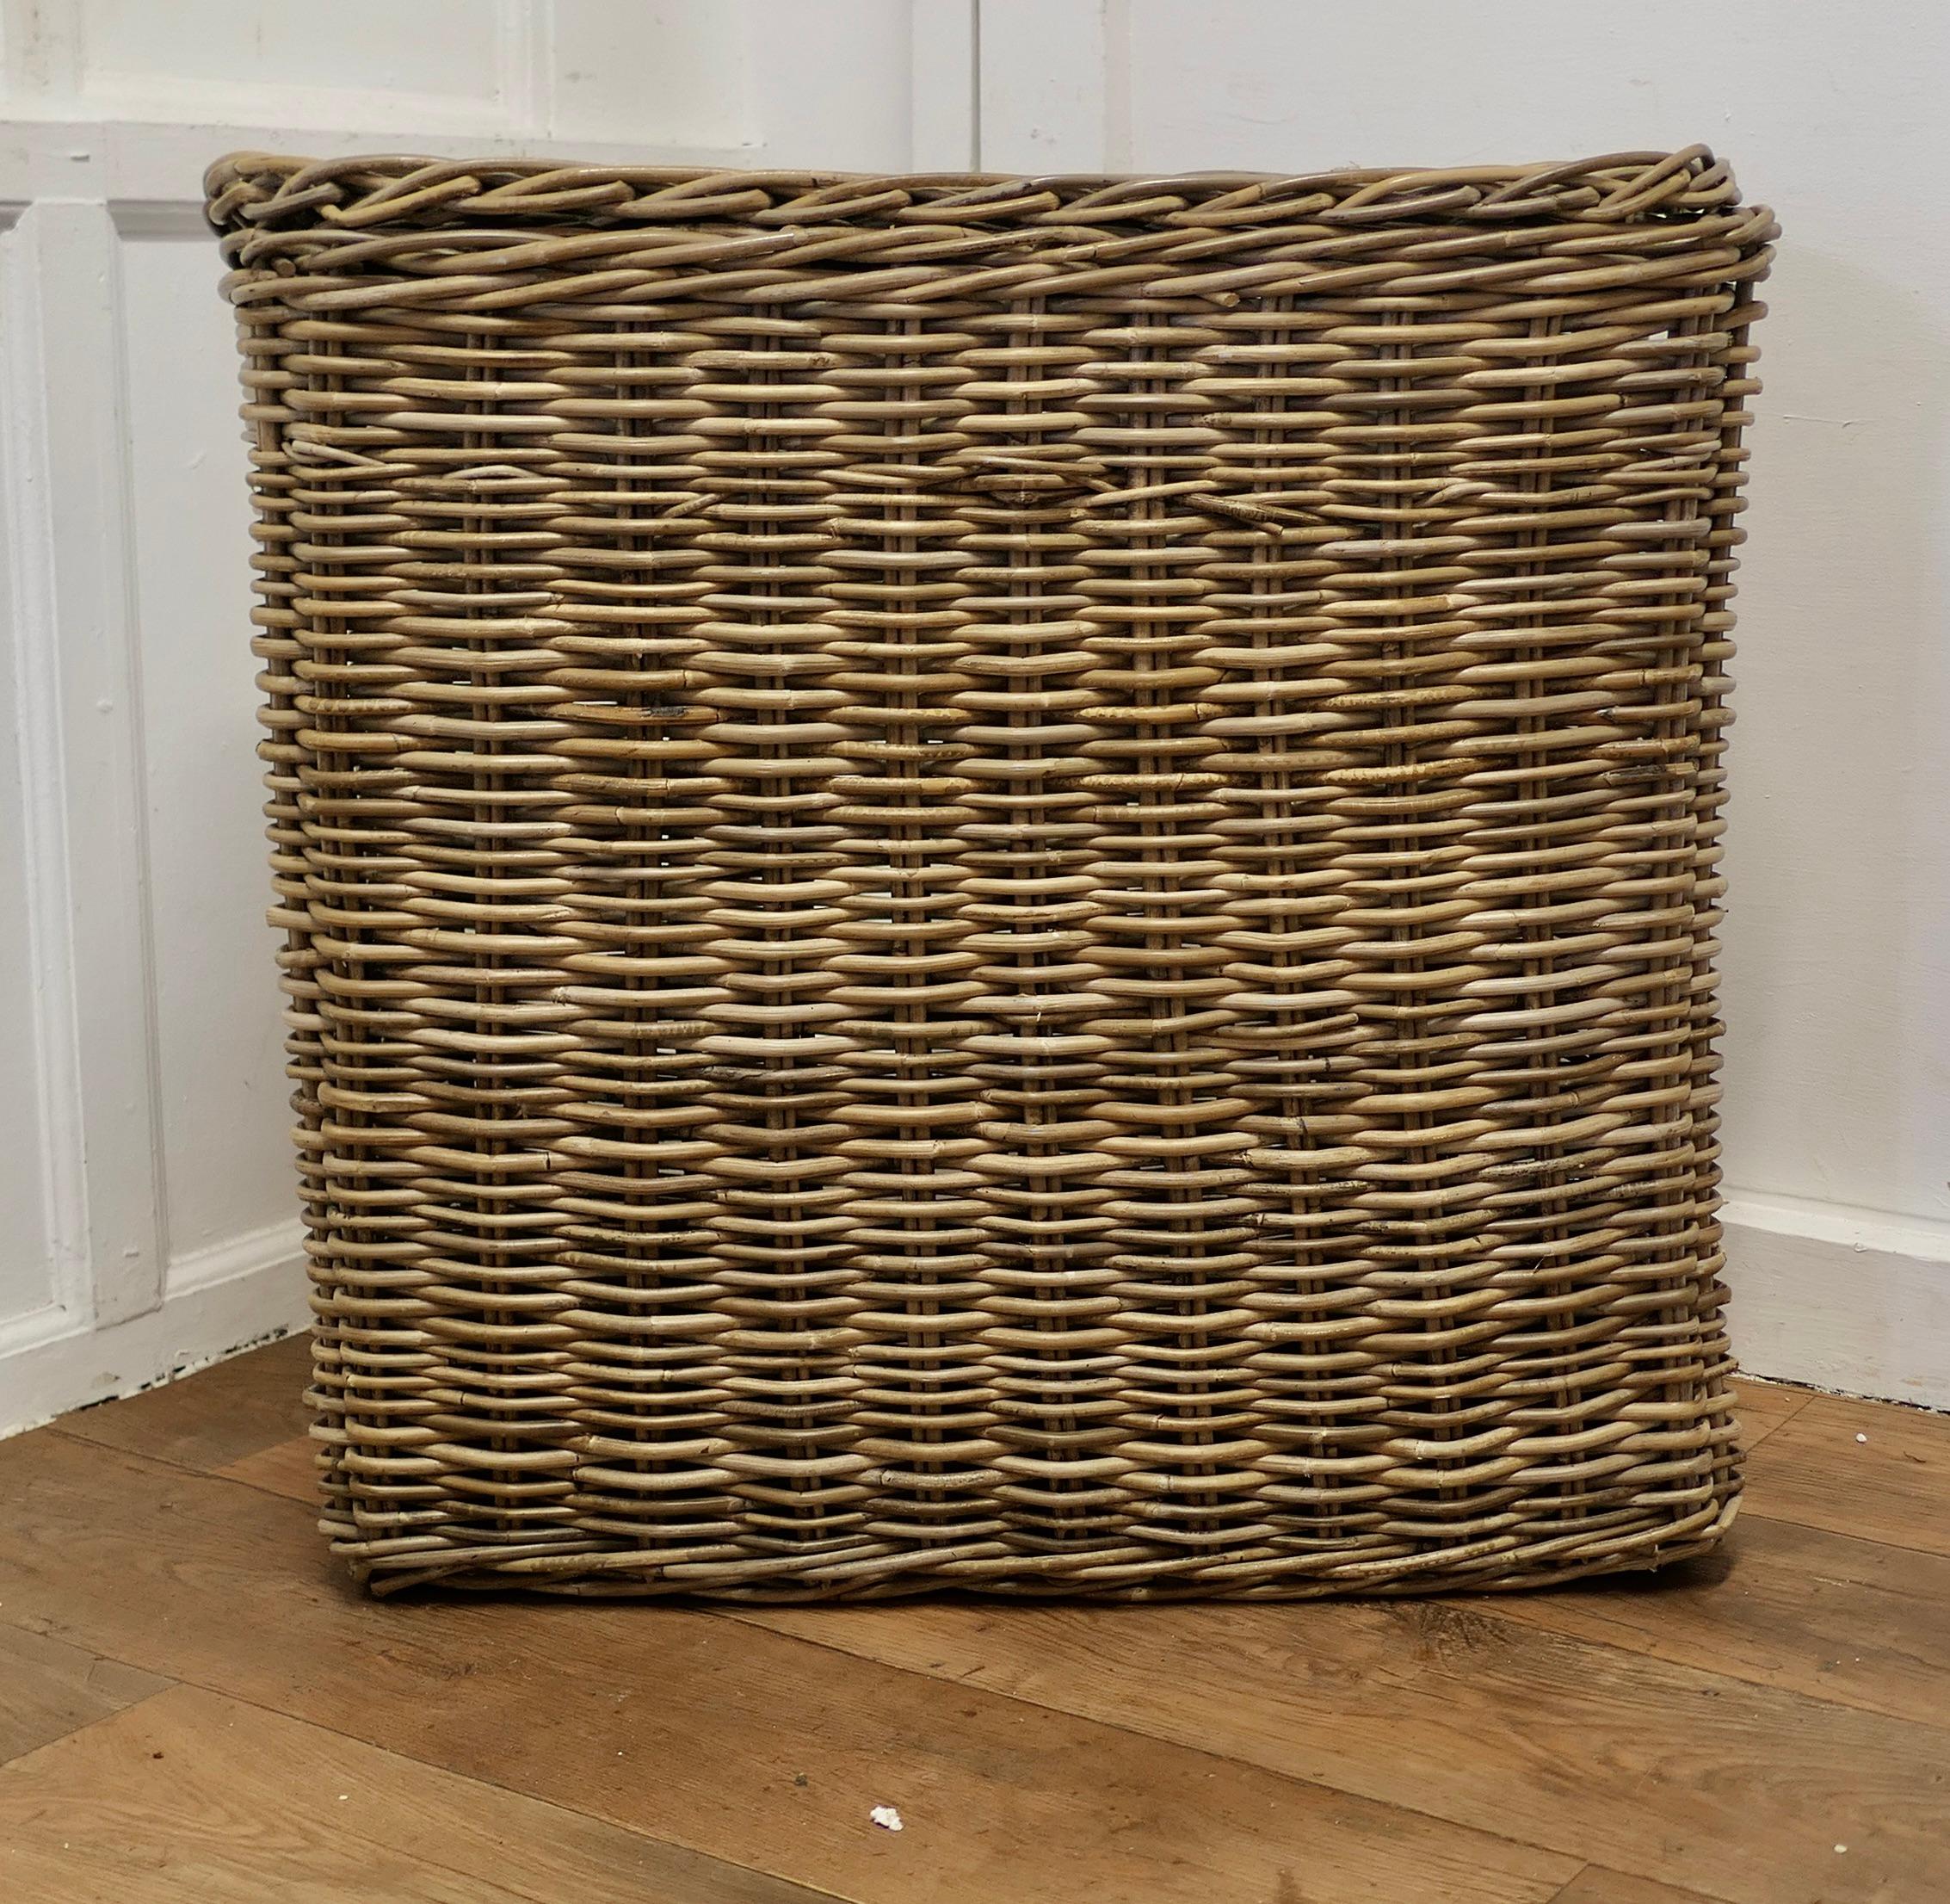 Vintage French Wicker Laundry Basket with Lid

This is an excellent example and in remarkably good condition, this strong basket is divided in to 2 sections, both the basket and the lid are woven in age darkened Willow, the basket has only ever been